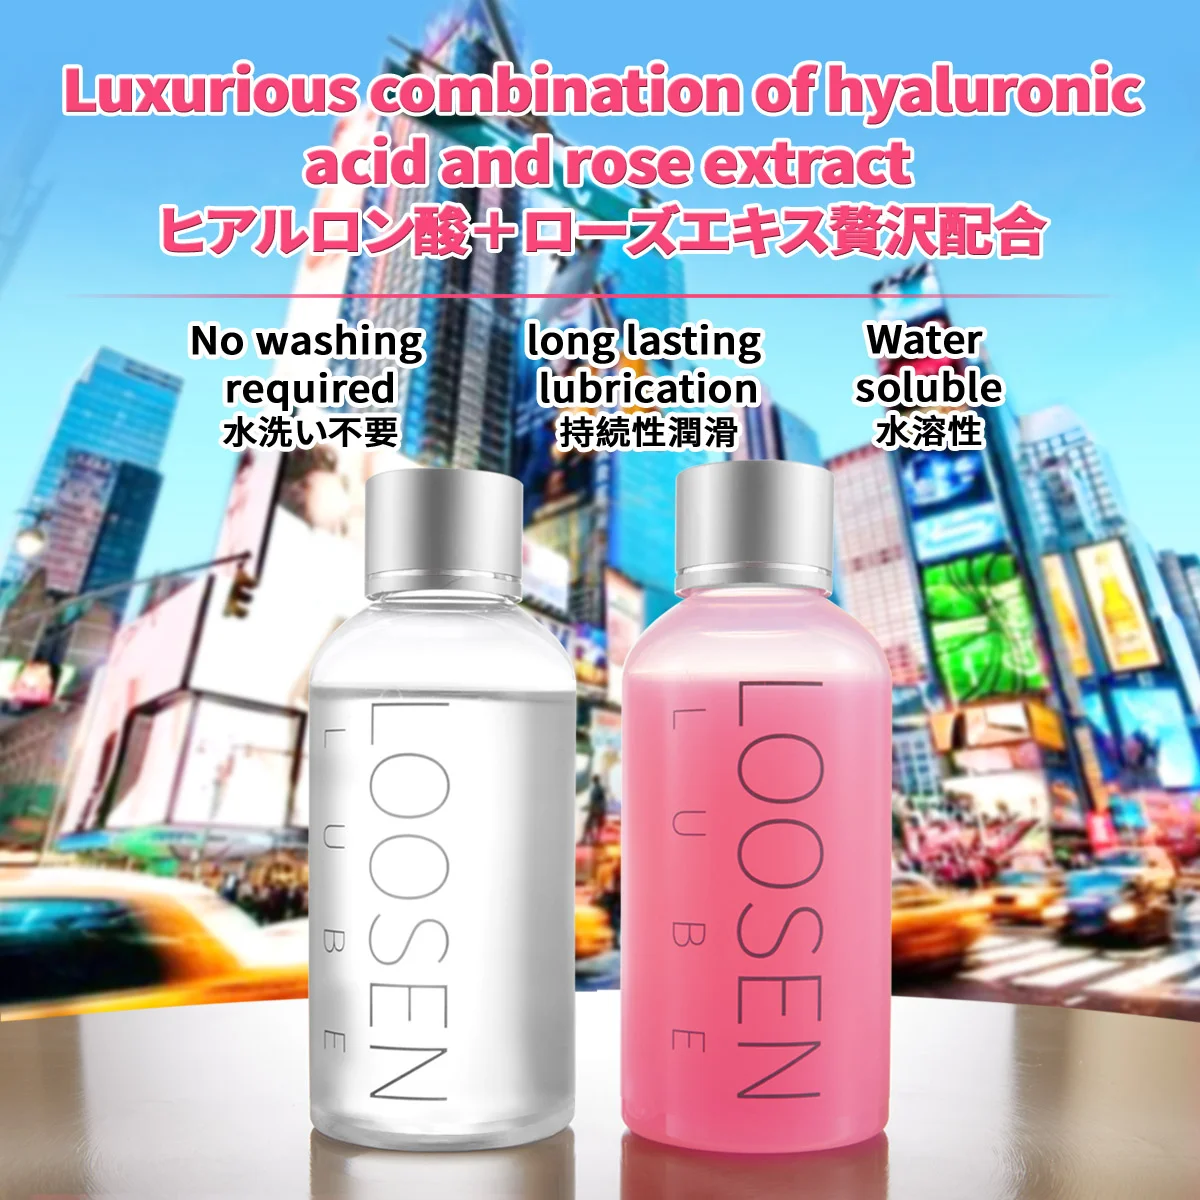 adult lube couples pleasure，water based flavor lube，lubricante para sexo，personal lubricant，lubricant lotions，hemp based lube